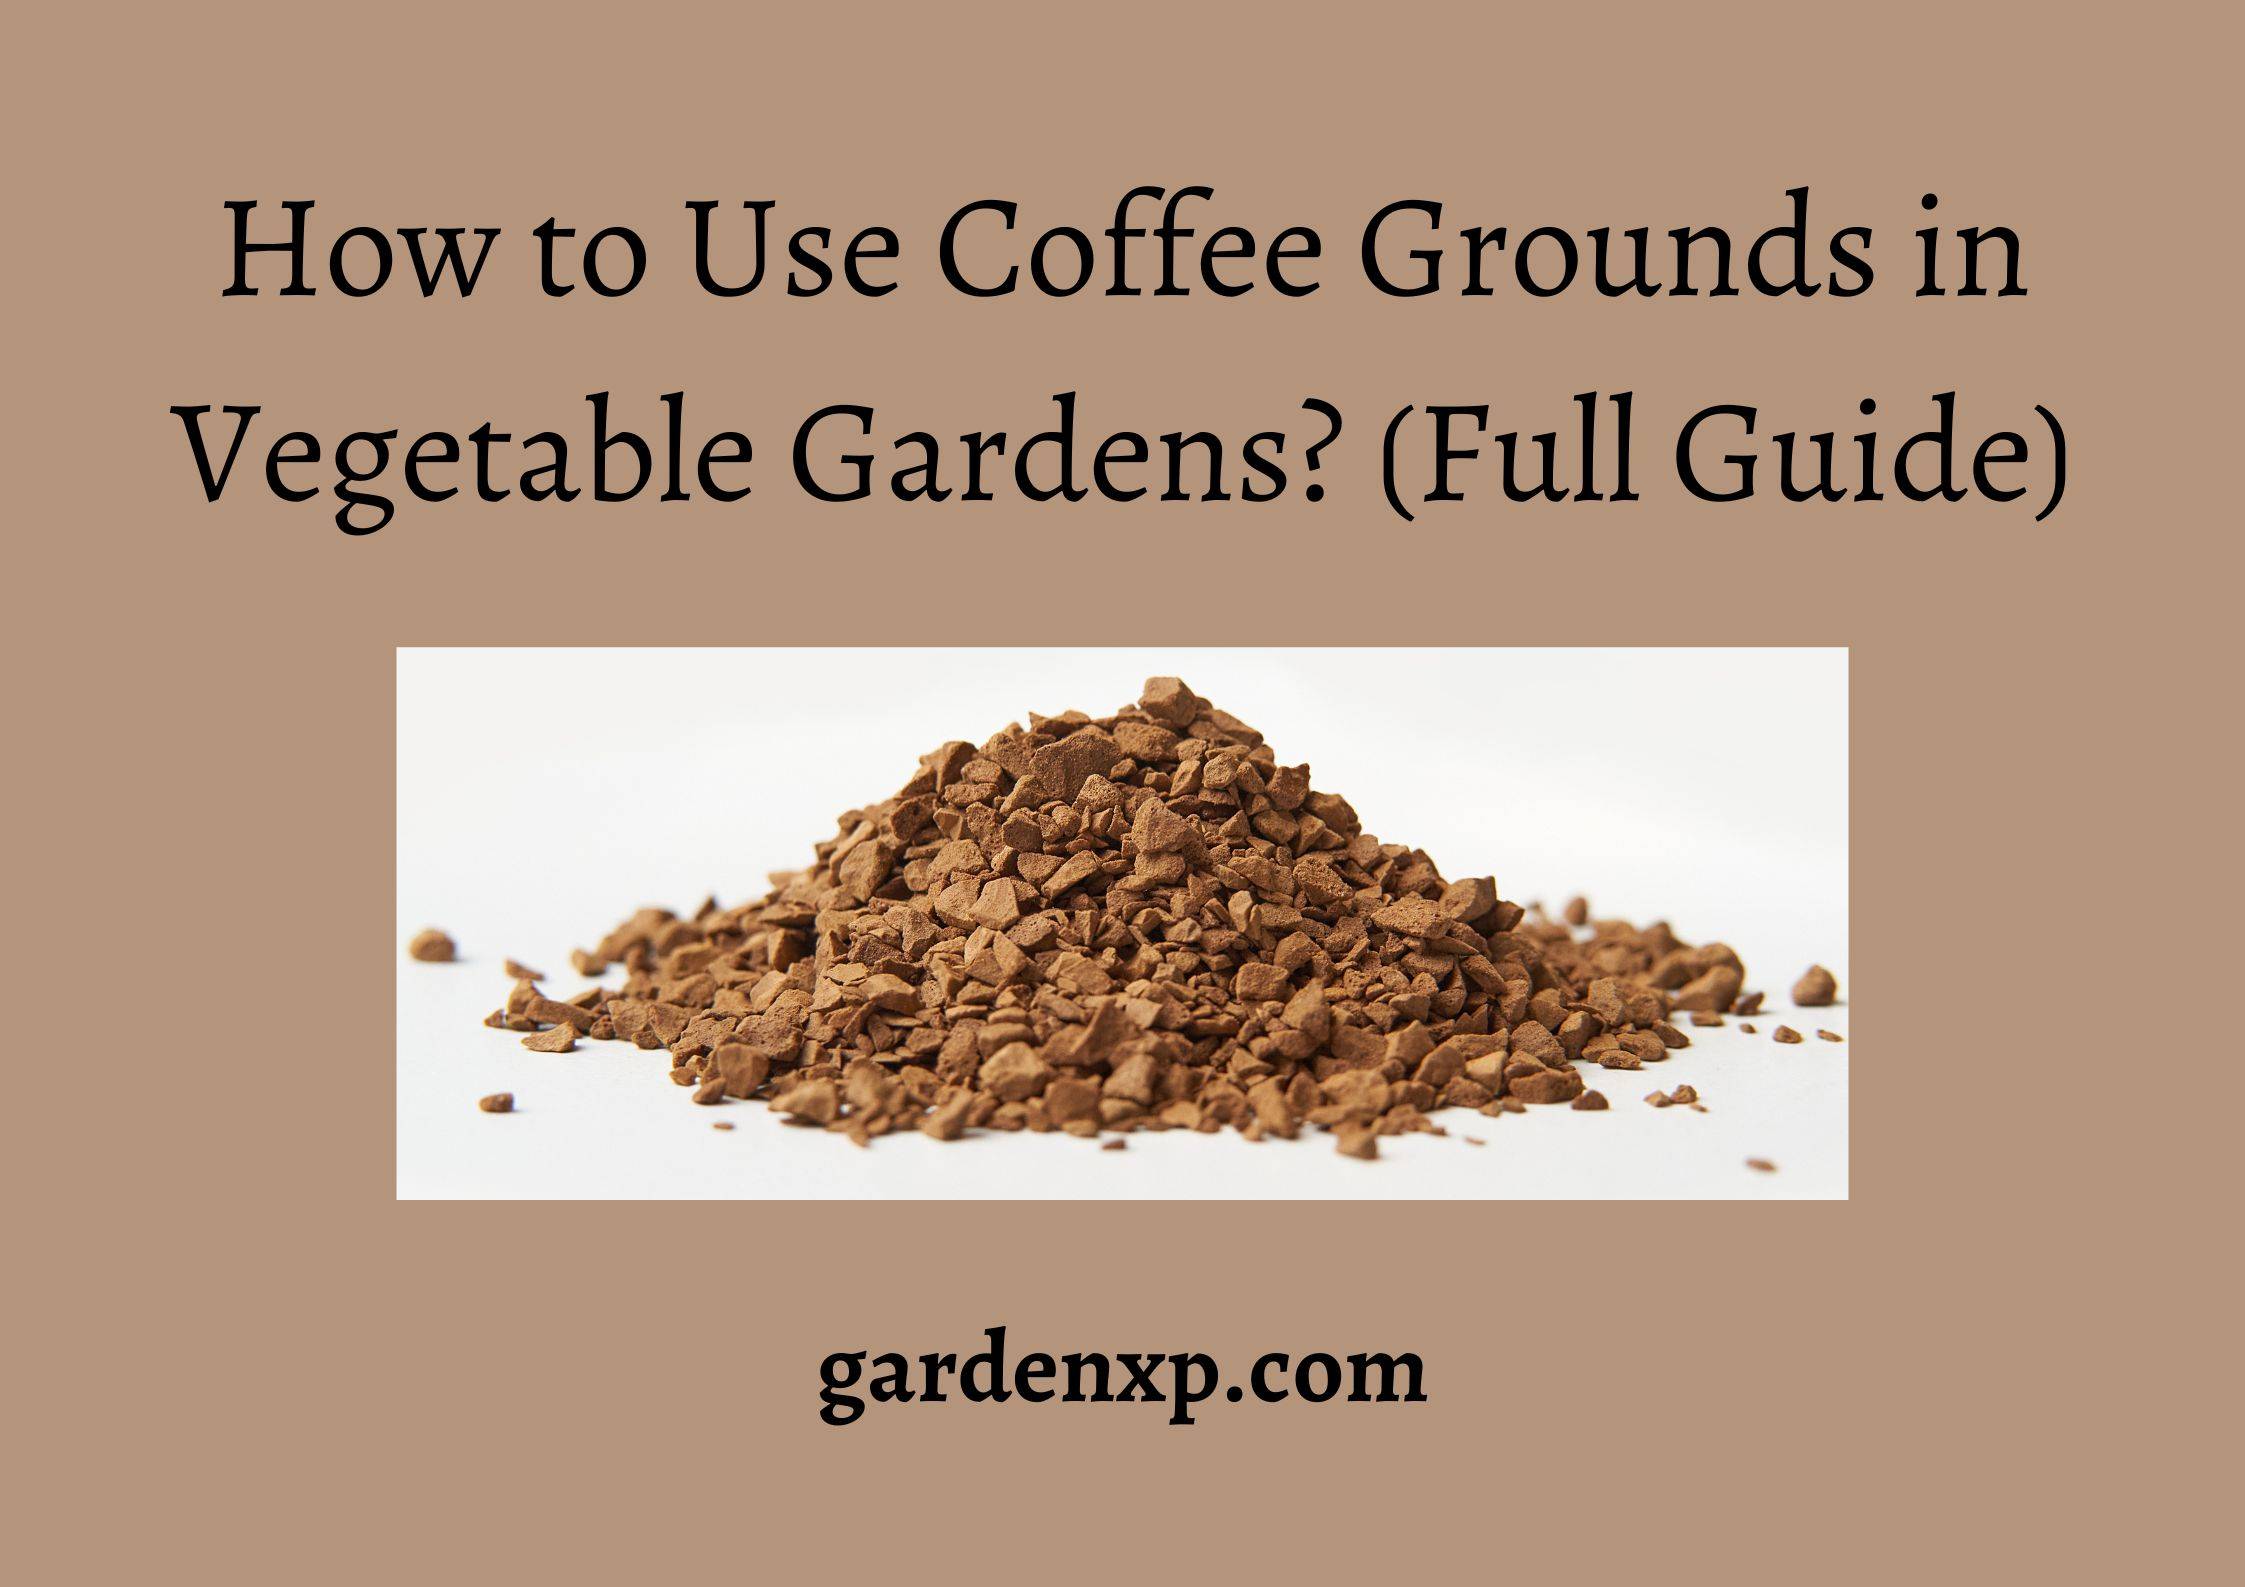 How to Use Coffee Grounds in Vegetable Gardens? (Full Guide)